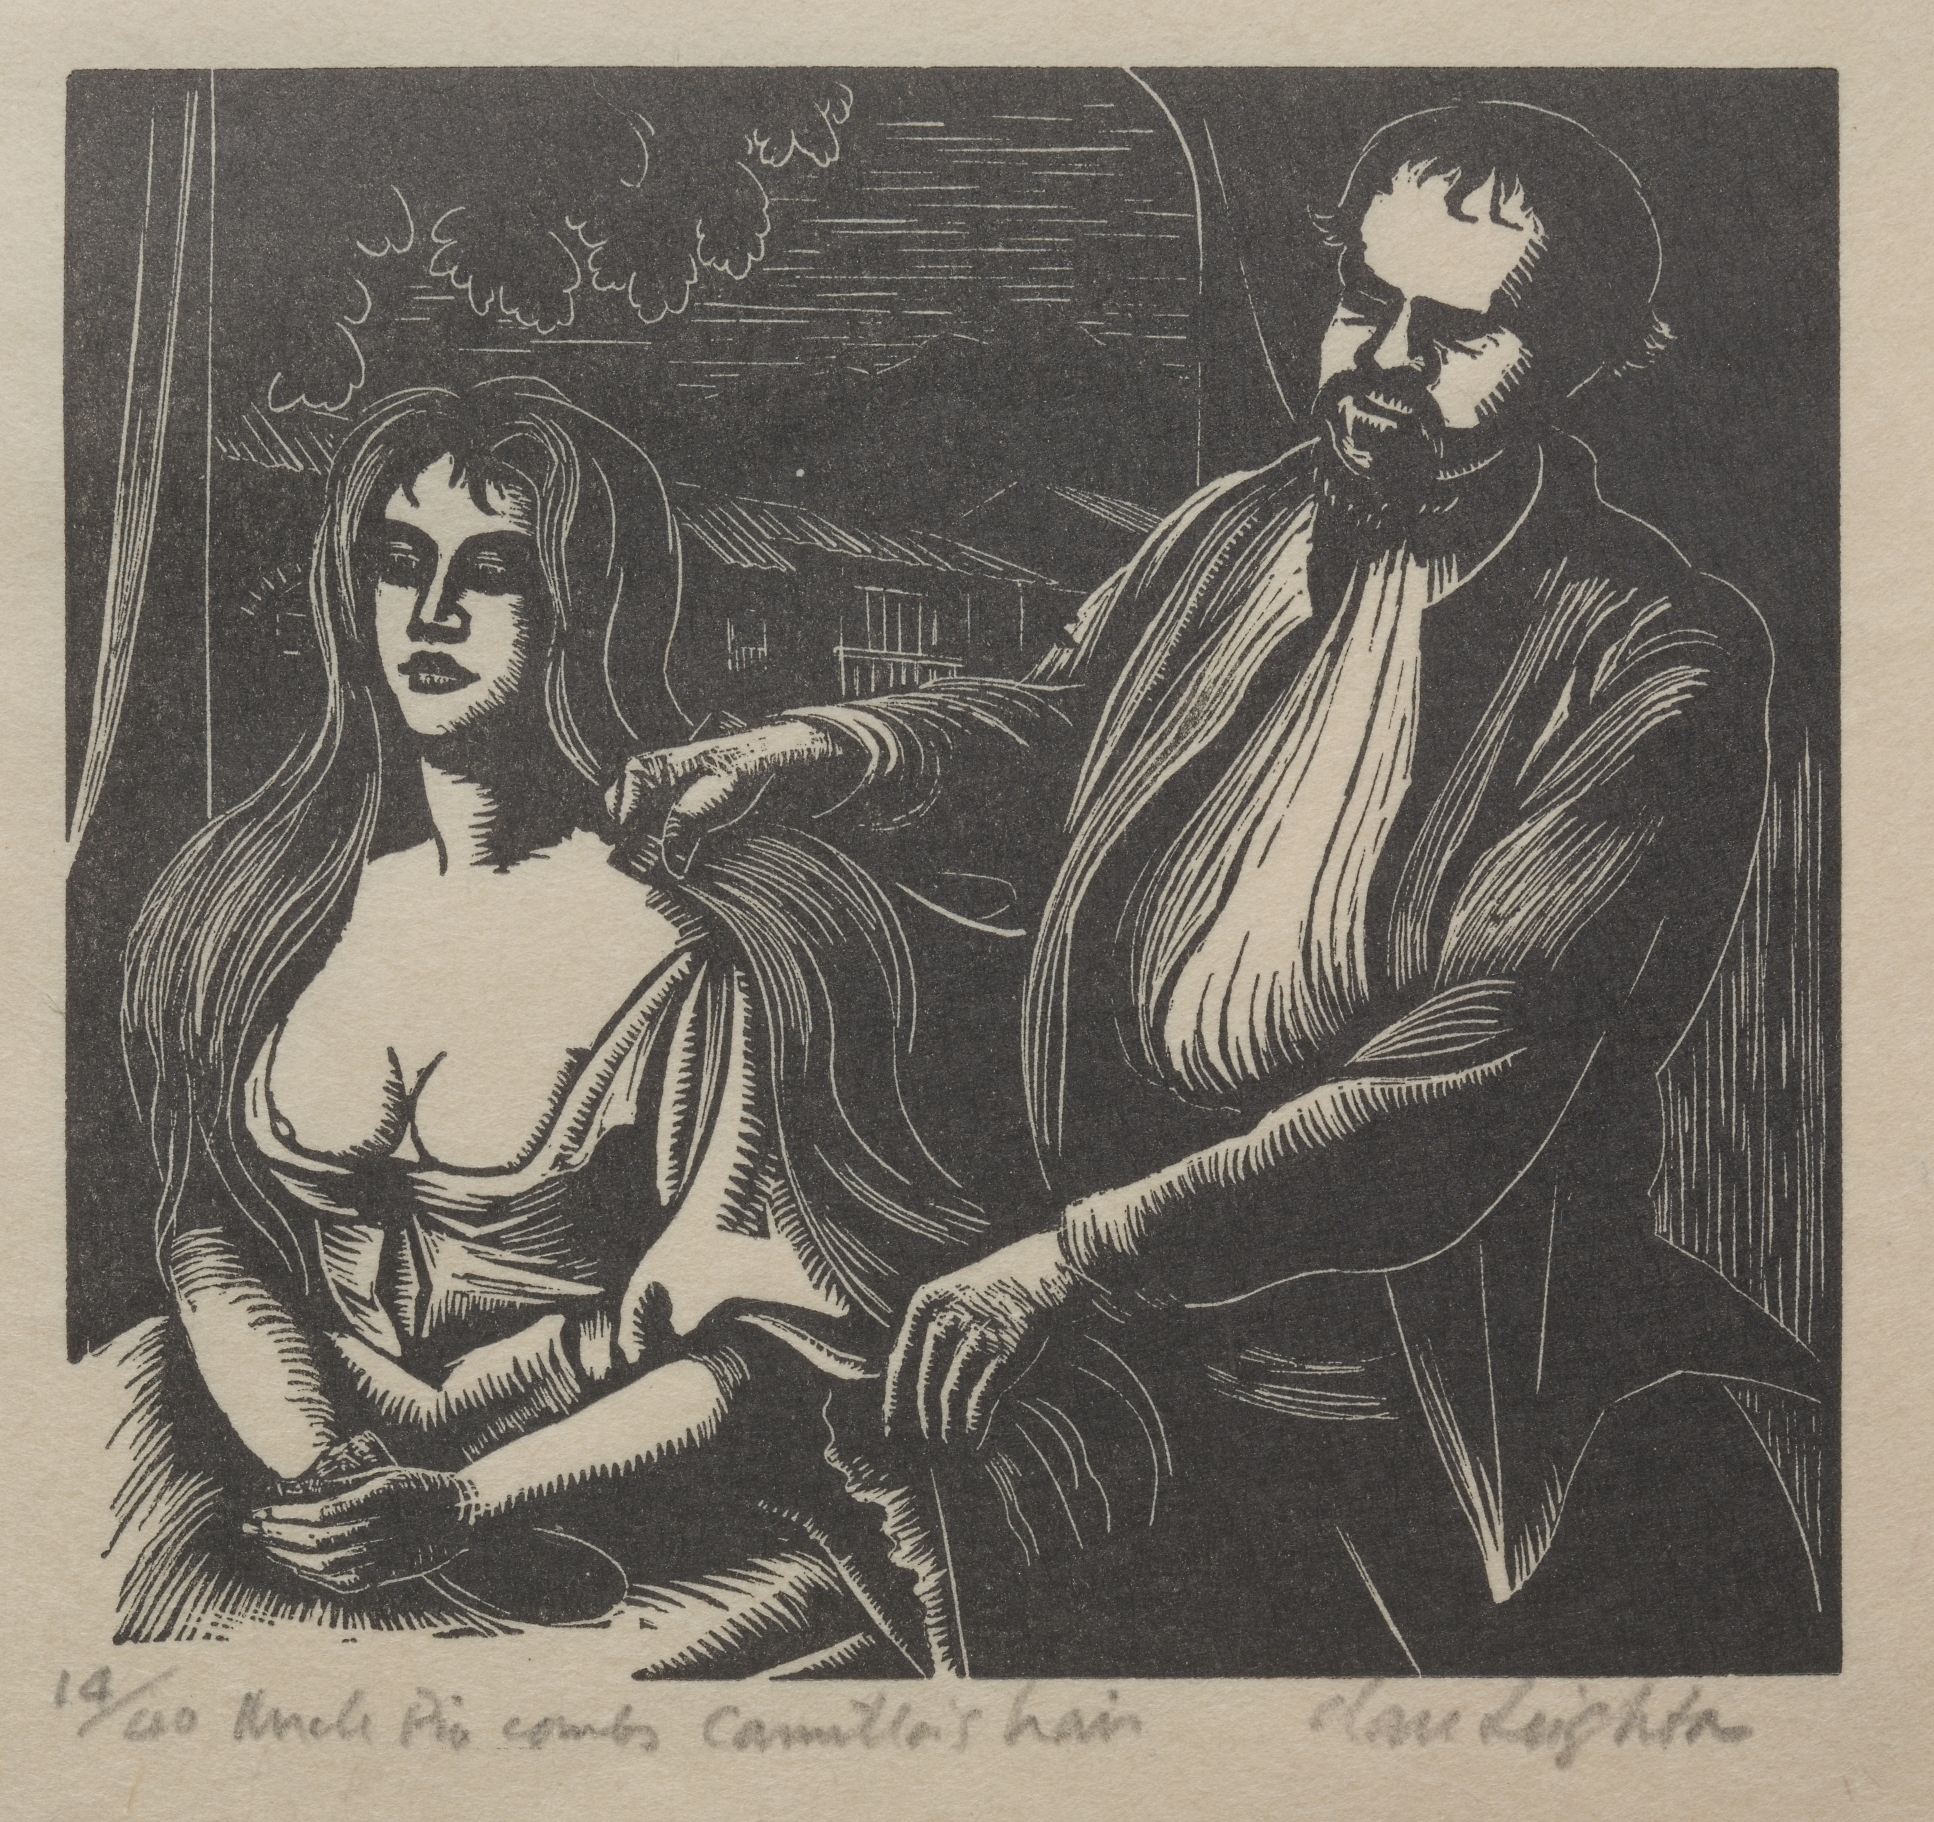 Uncle Pio and Camila (illustration for The Bridge of San Luis Rey by Thornton Wilder)